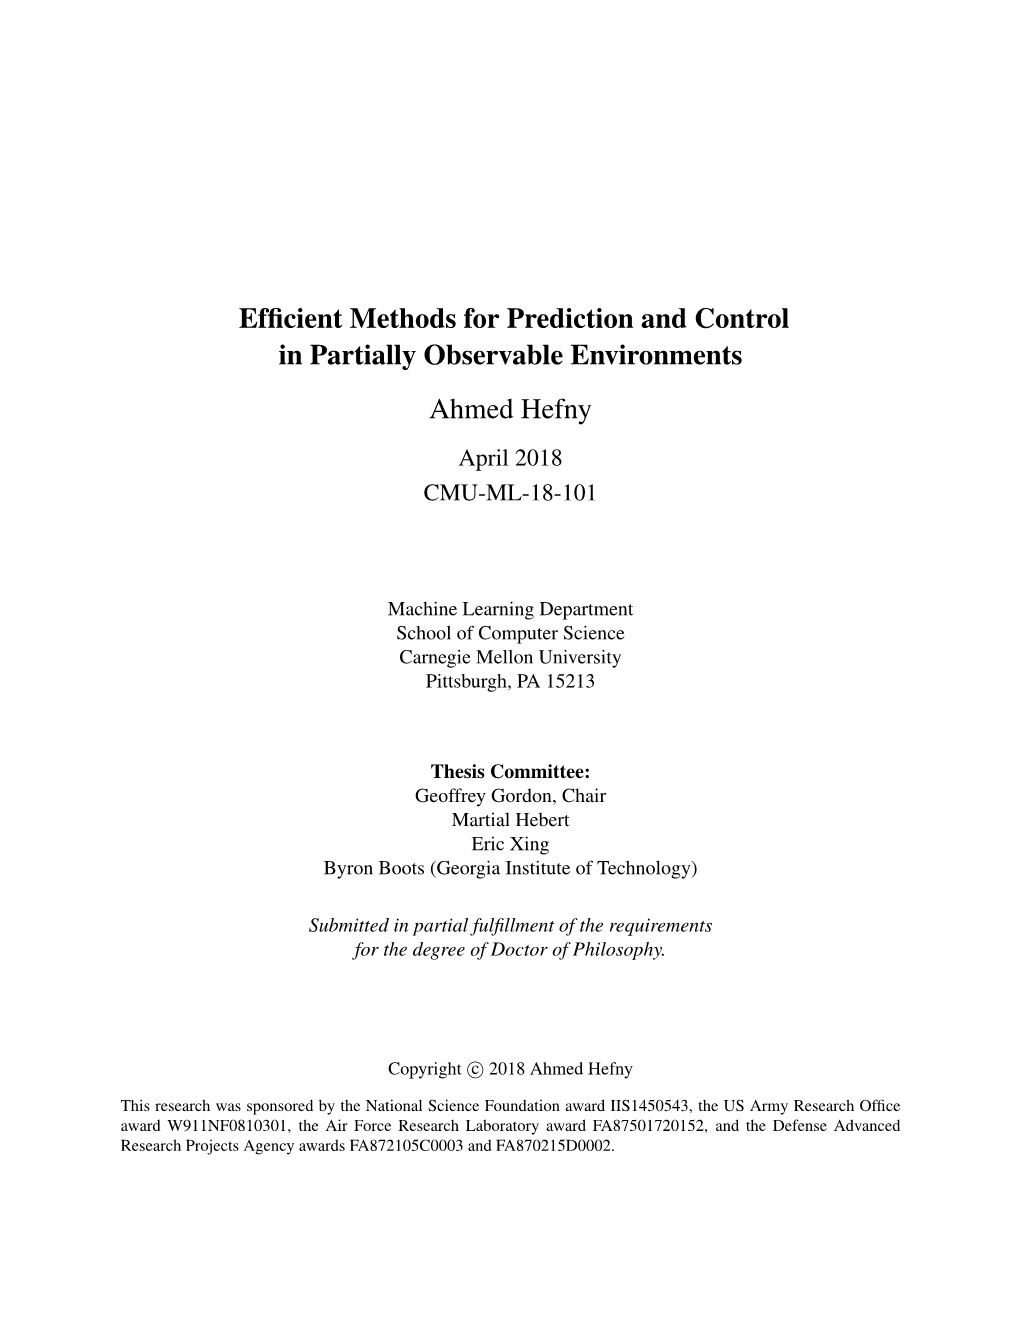 Efficient Methods for Prediction and Control in Partially Observable